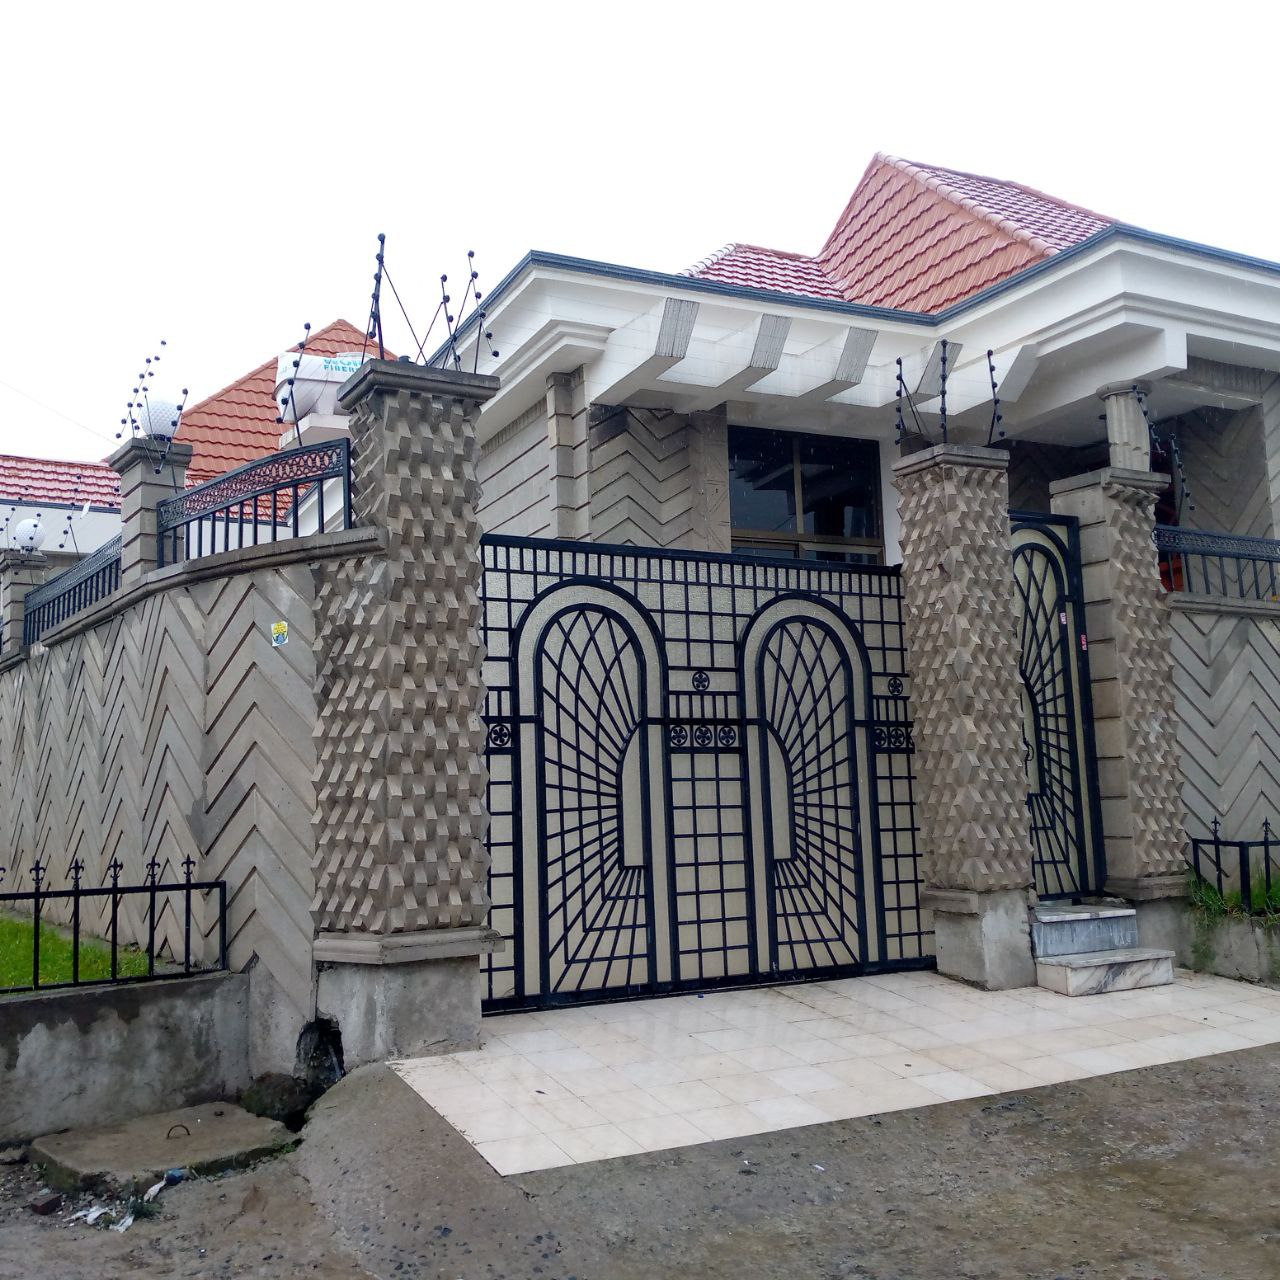 Hot 2021 Villa For Sale in Addis Ababa, Summit